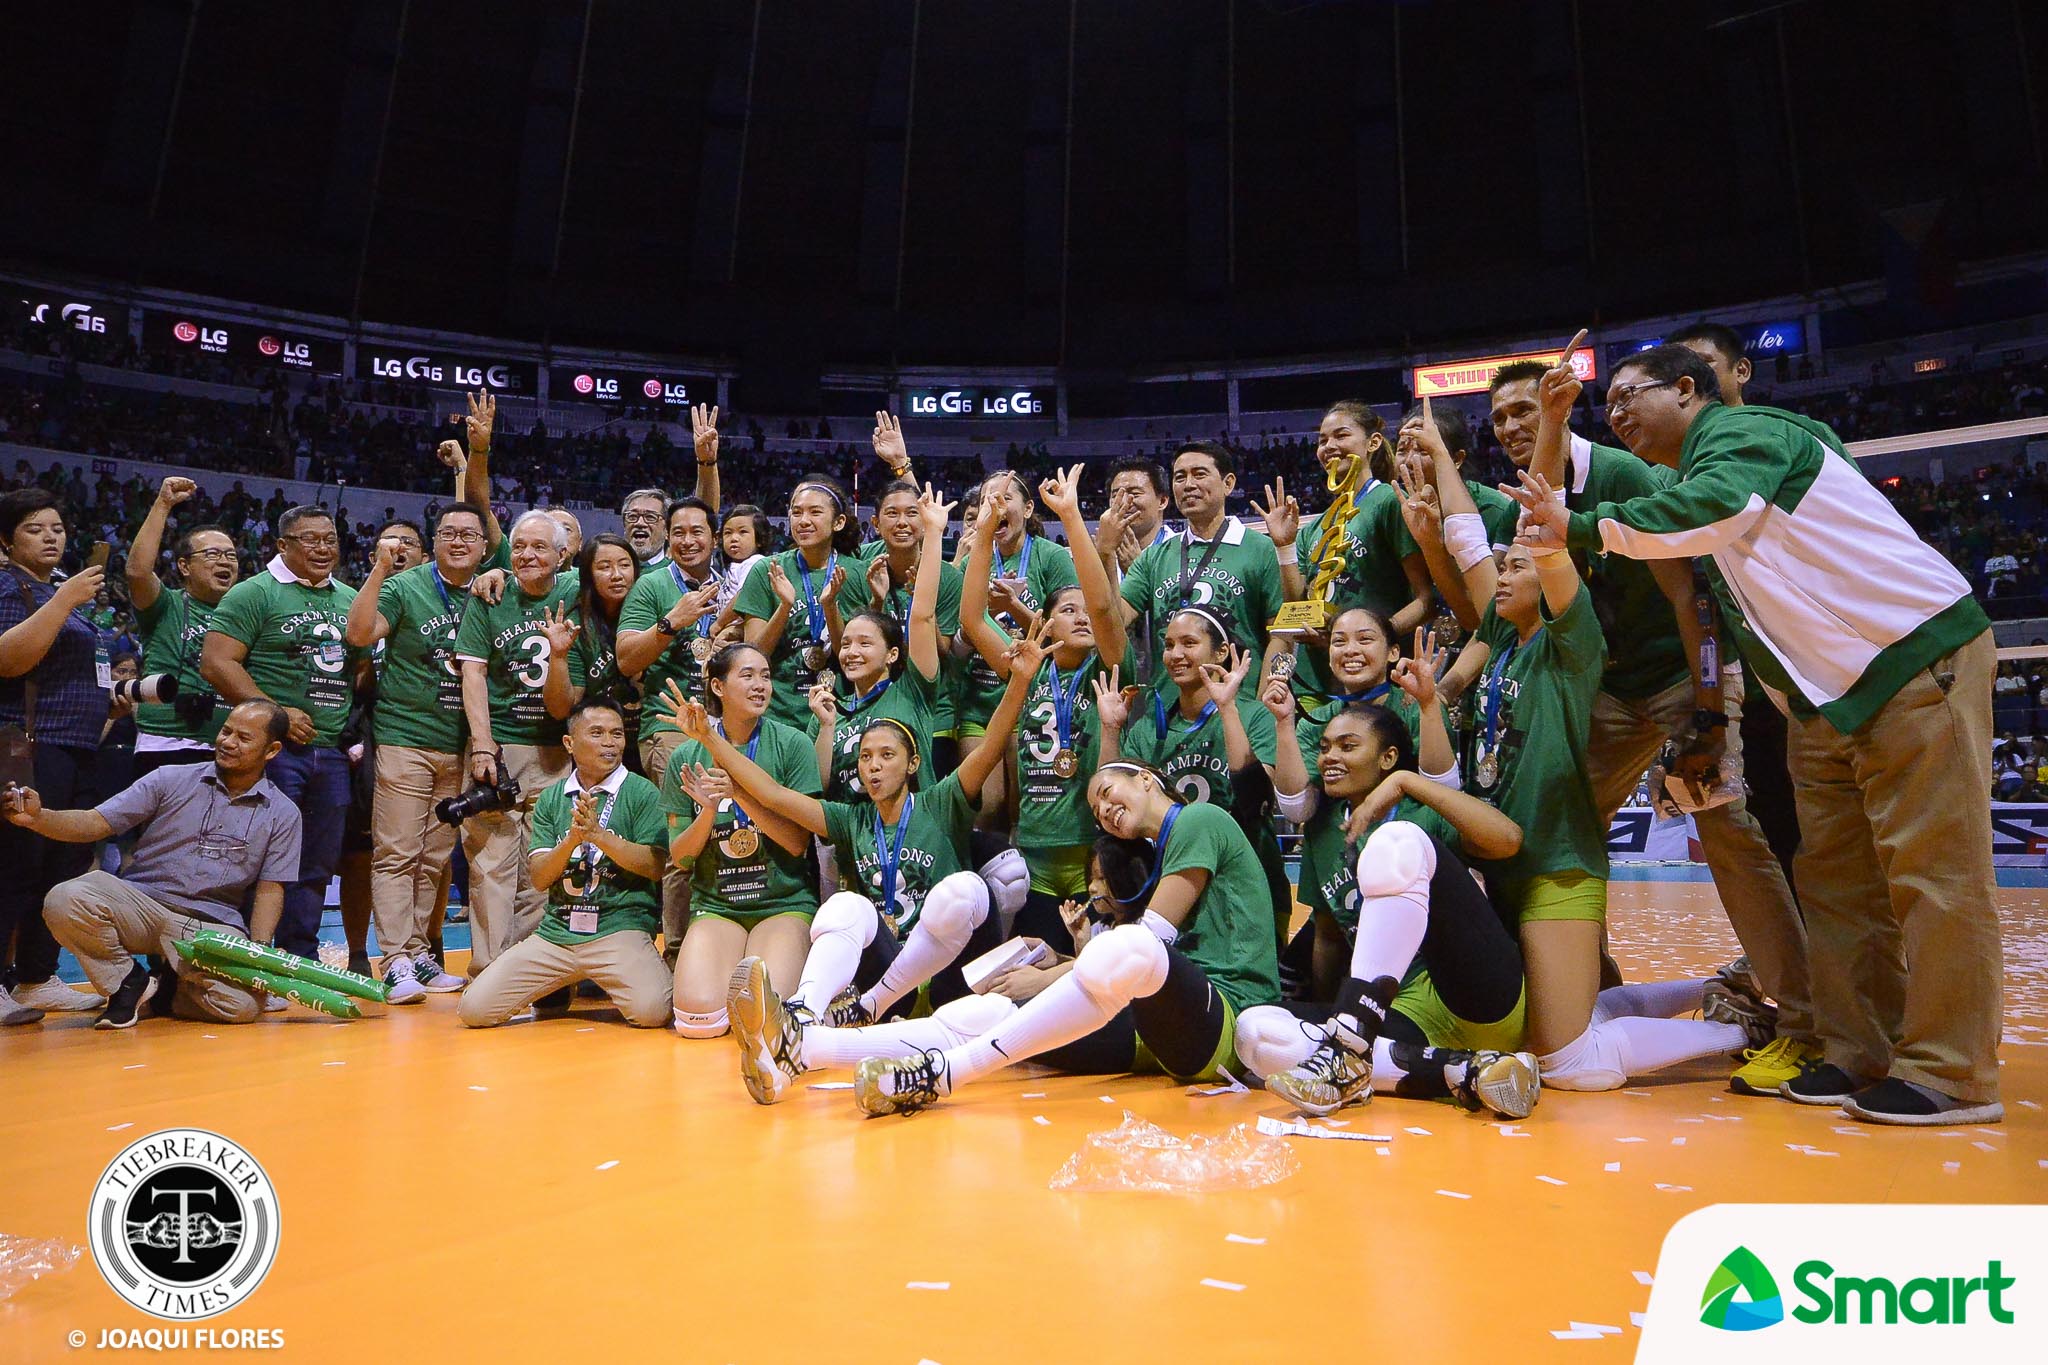 UAAP-80-Volleyball-DLSU-vs.-FEU-DLSU-champion-9526 Cargo Movers pull inspiration from sisters Lady Spikers' championship win News PSL Volleyball  - philippine sports news